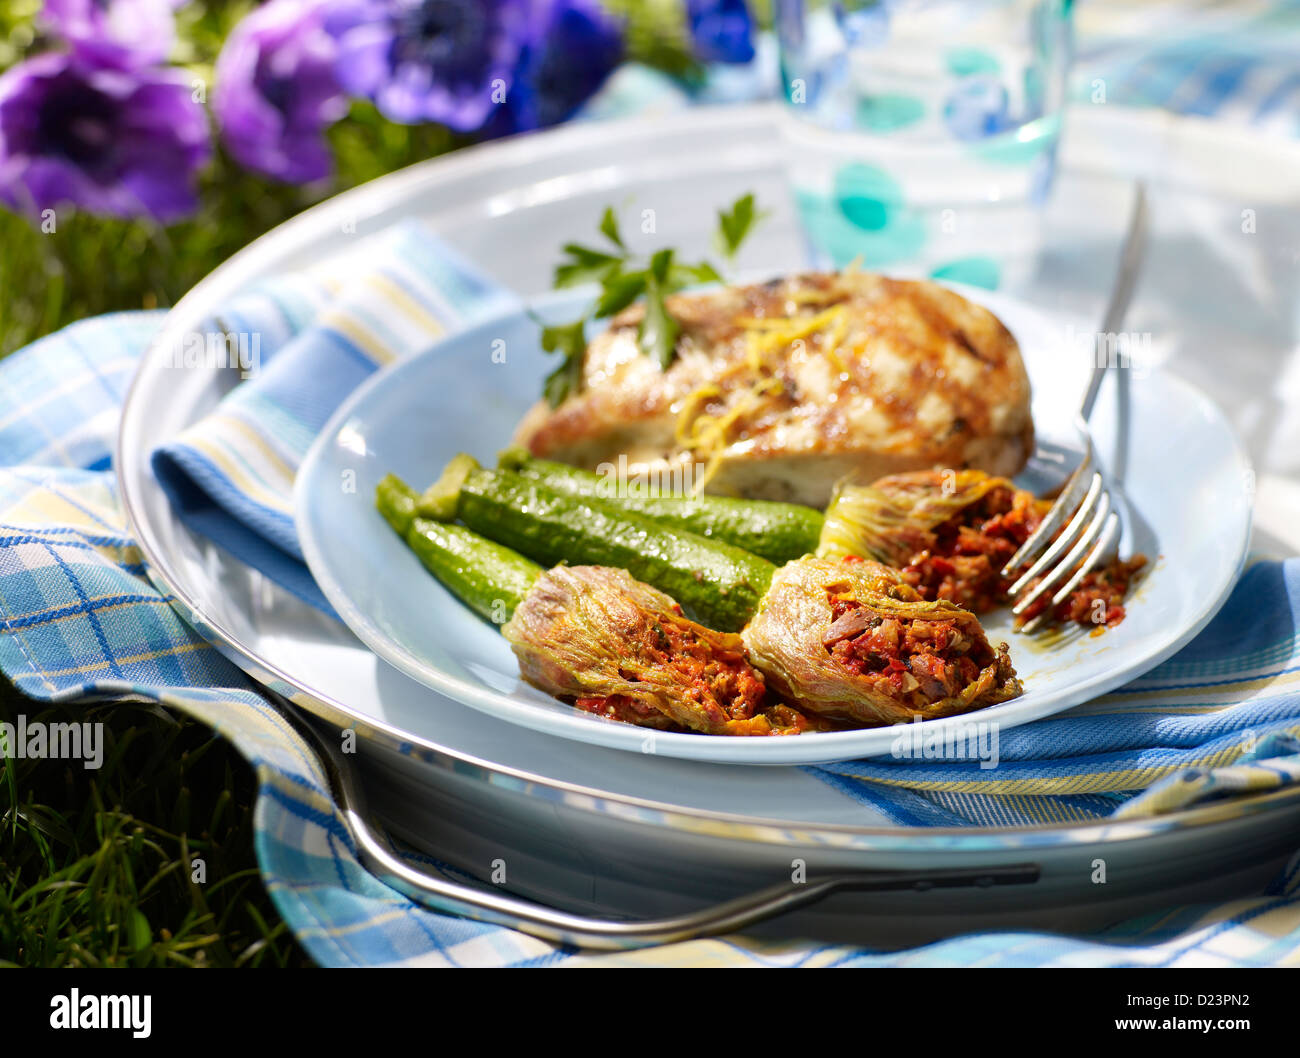 Stuffed squash blossoms with grilled chicken and zucchini in an outdoor picnic setting Stock Photo